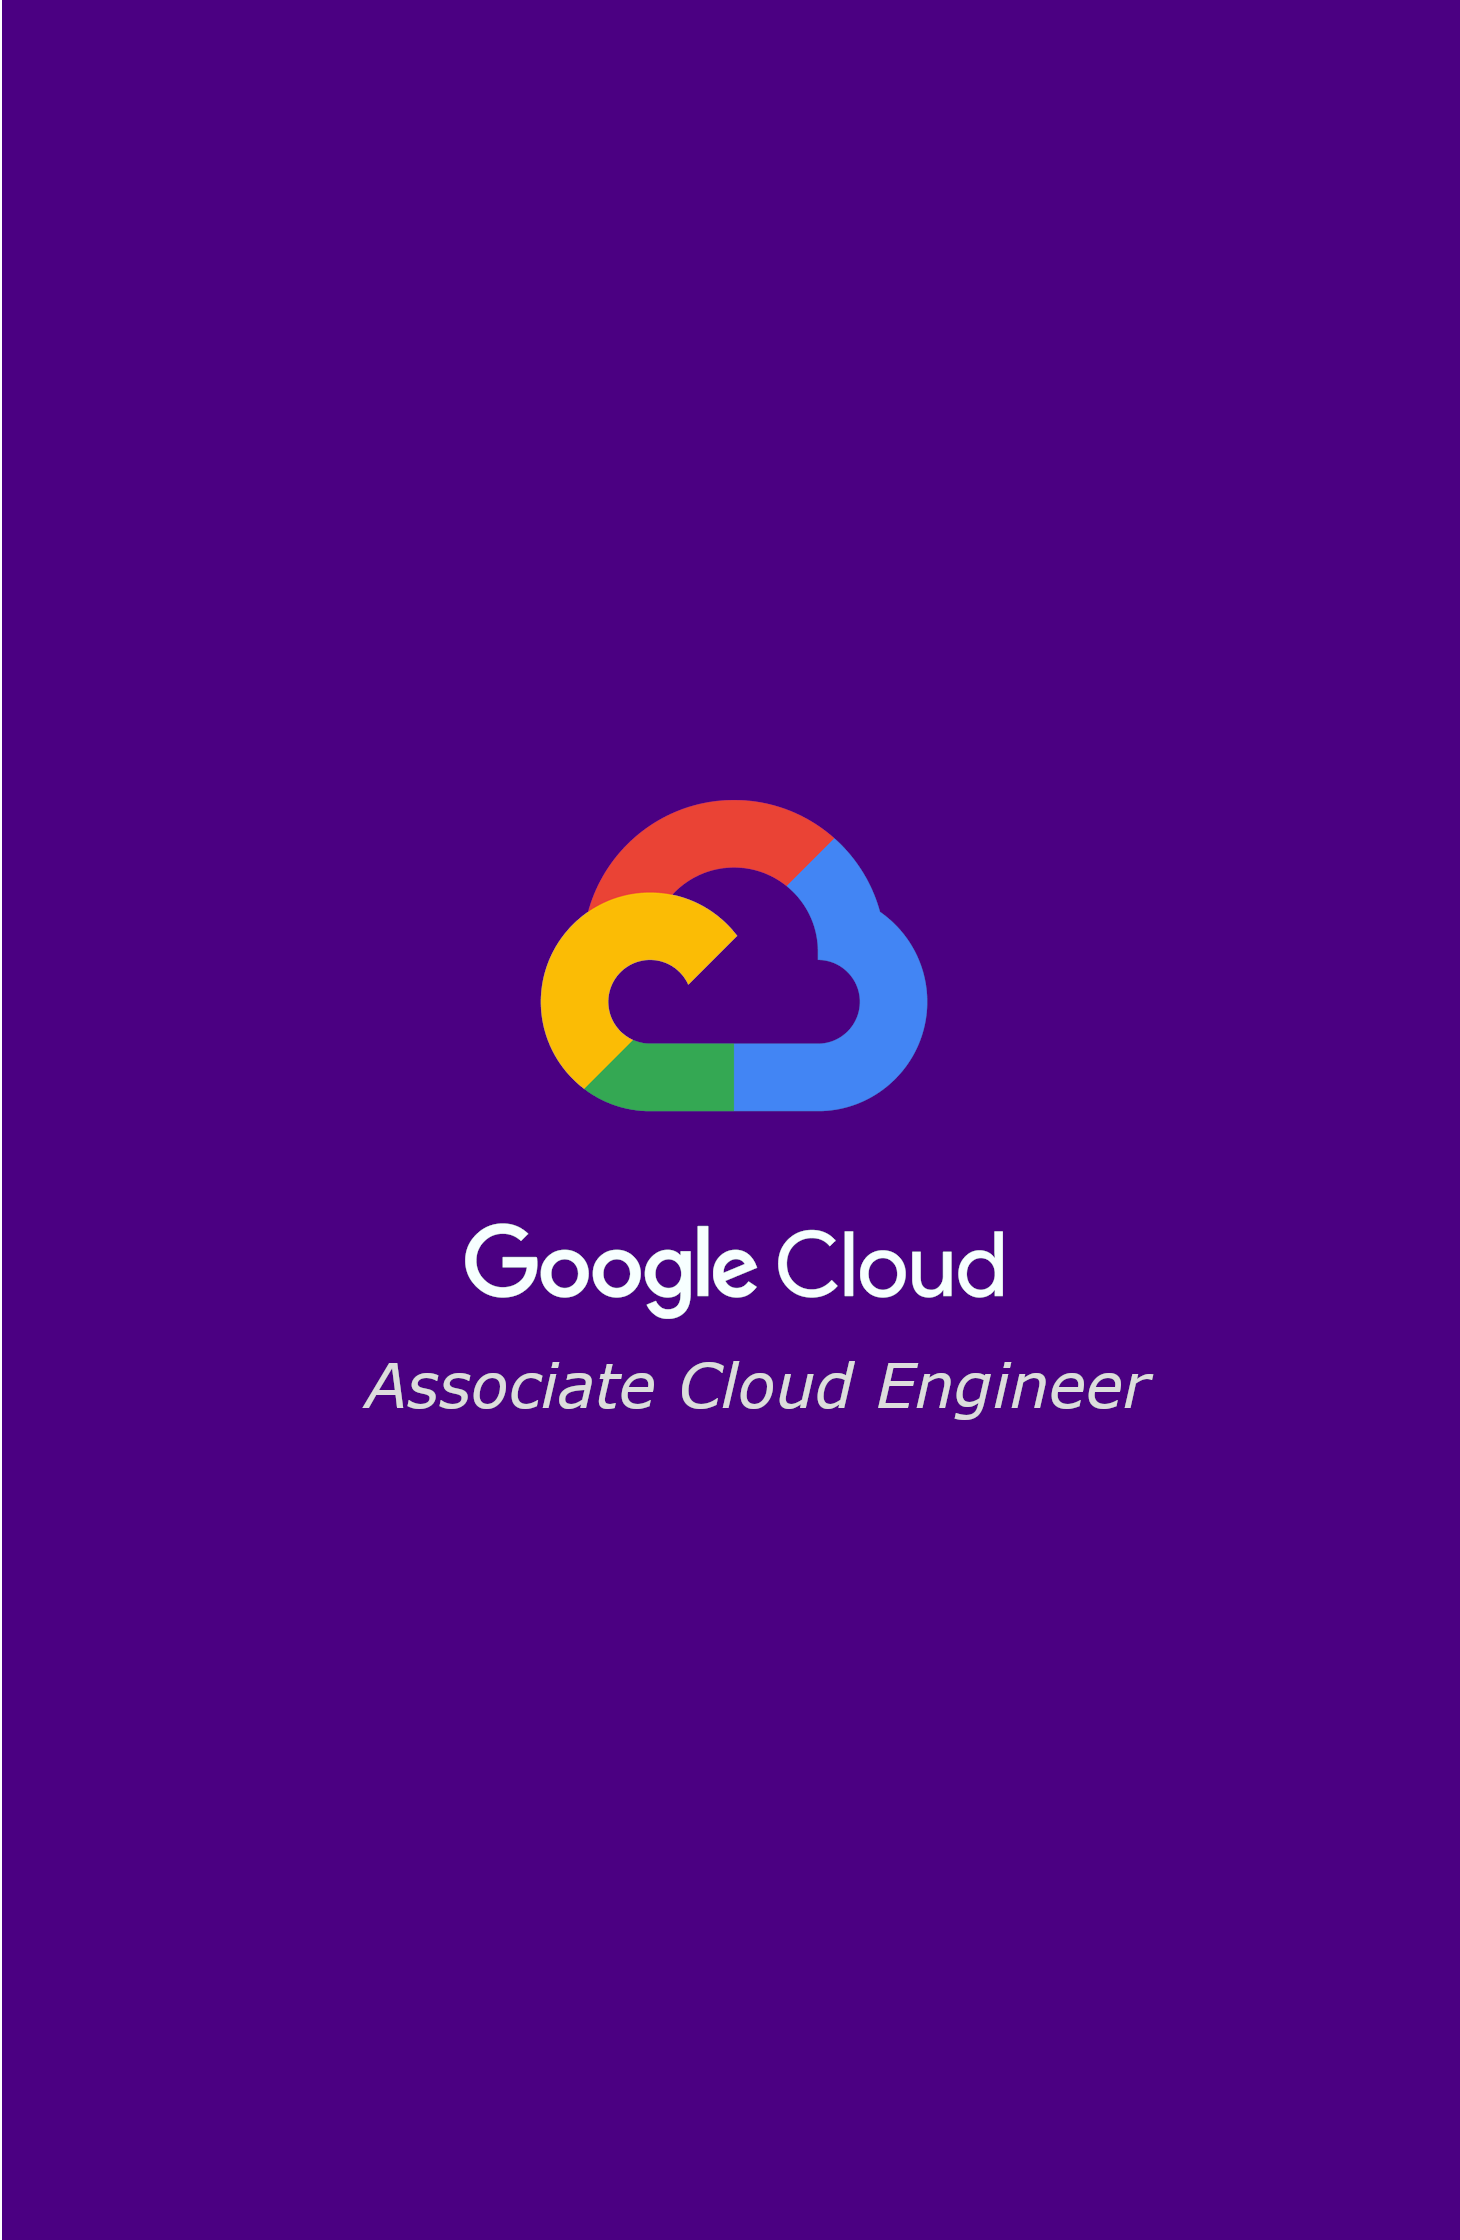 Google Cloud Fundamentals: Core Infraestructure - Resource and access in the cloud -> Cloud identity